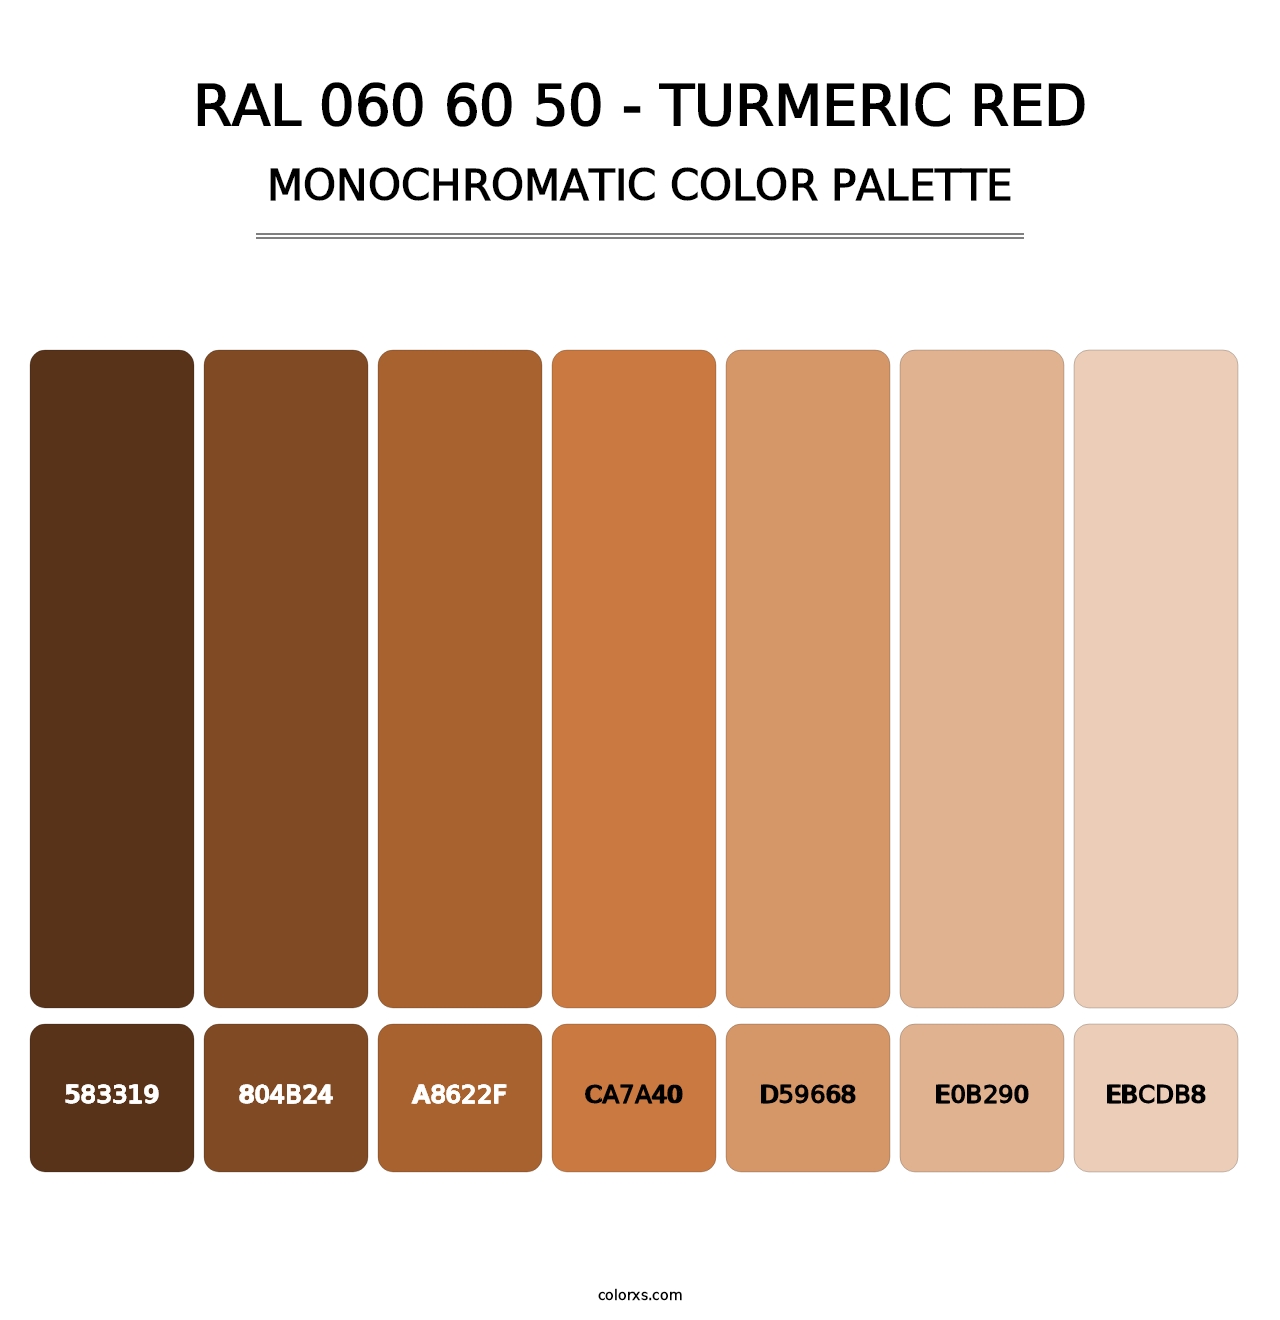 RAL 060 60 50 - Turmeric Red - Monochromatic Color Palette